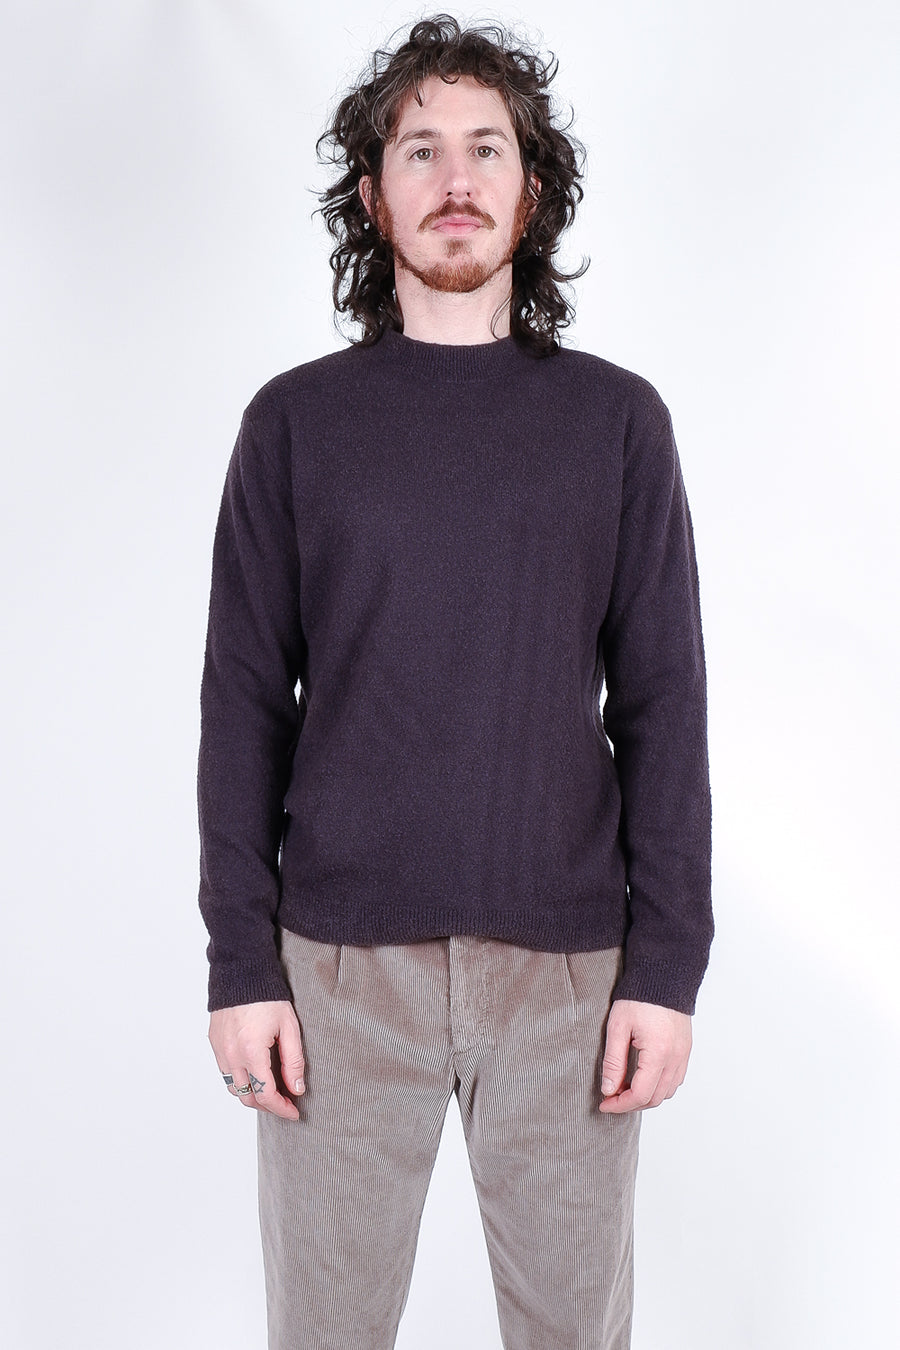 Buy the Daniele Fiesoli Boiled Wool Turtle Neck L/S T-Shirt in Charcoal at Intro. Spend £50 for free UK delivery. Official stockists. We ship worldwide.